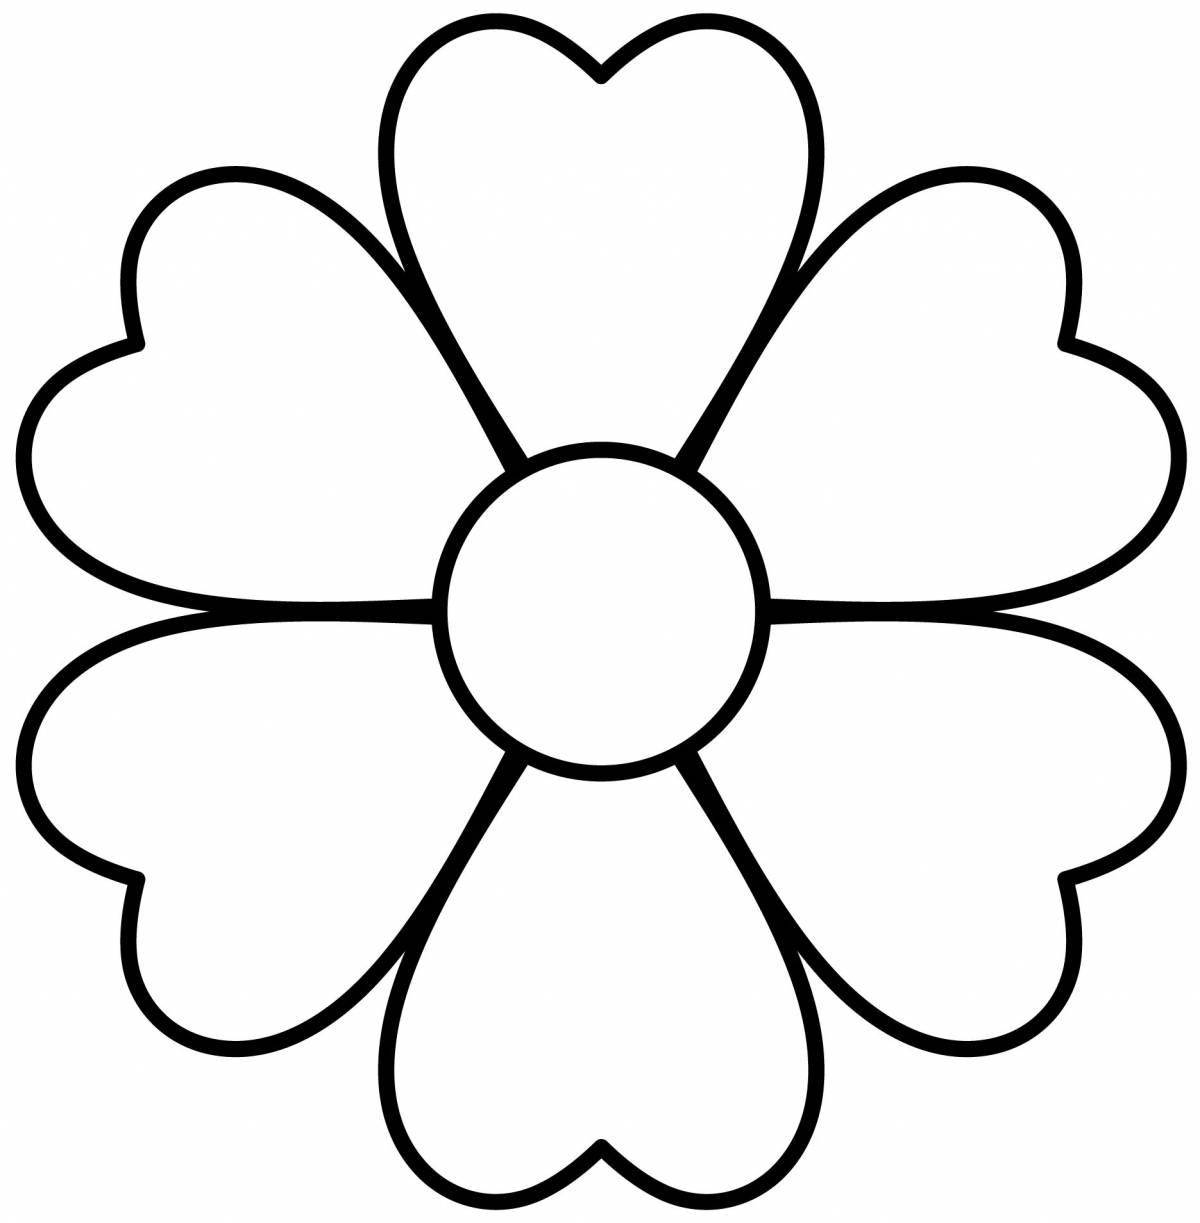 Charming daisy coloring page